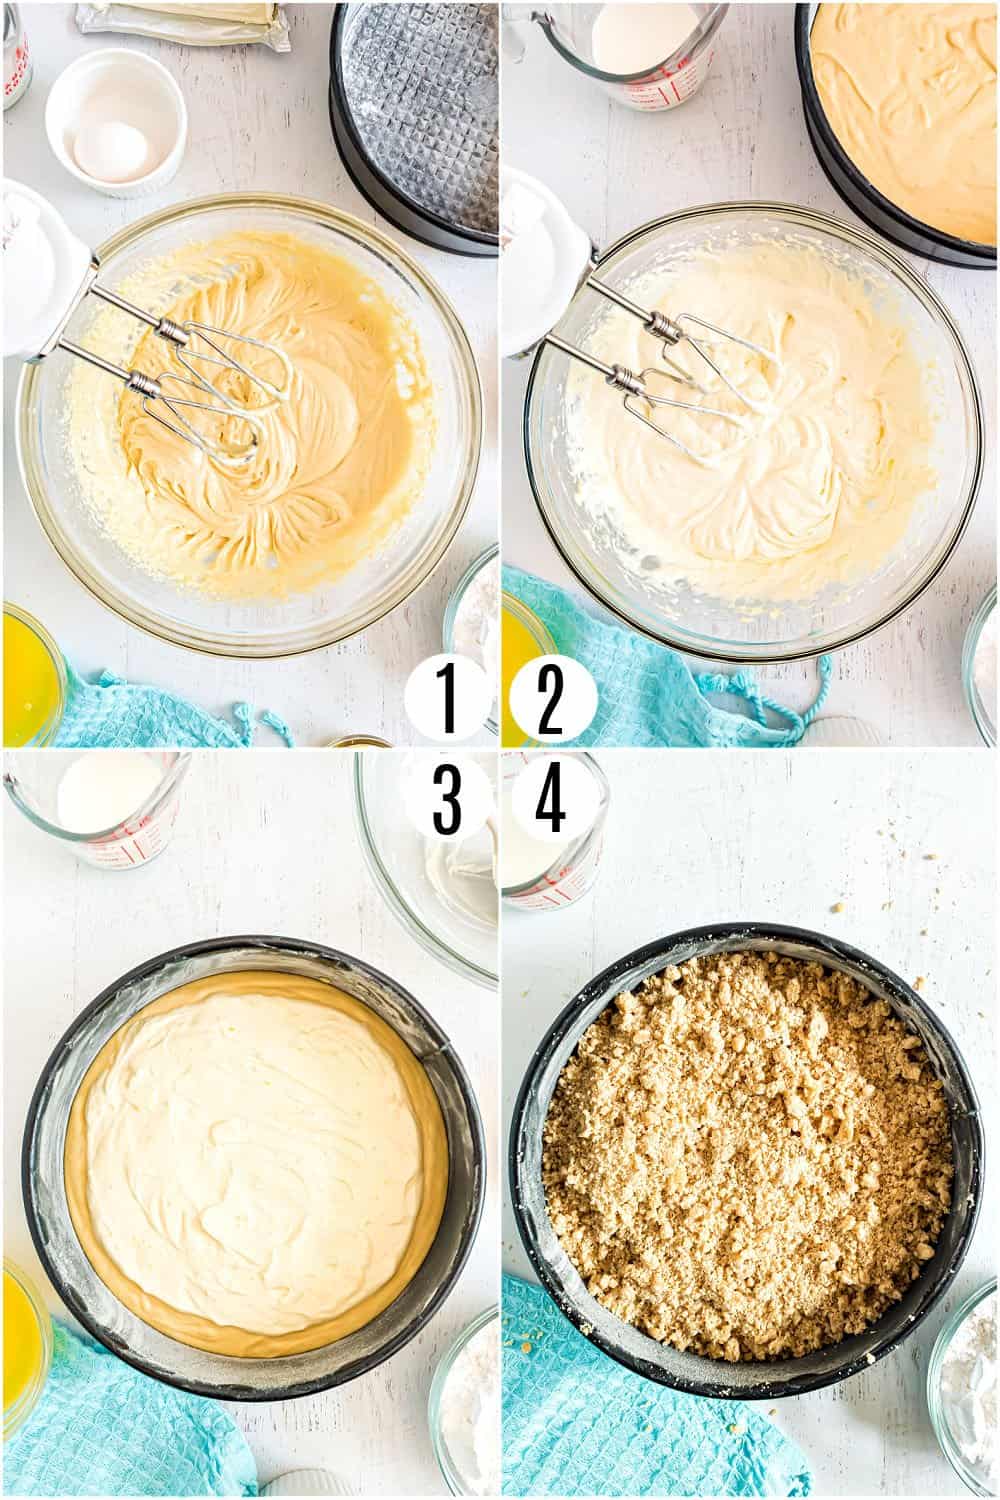 Step by step photos showing how to make lemon streusel coffee cake.